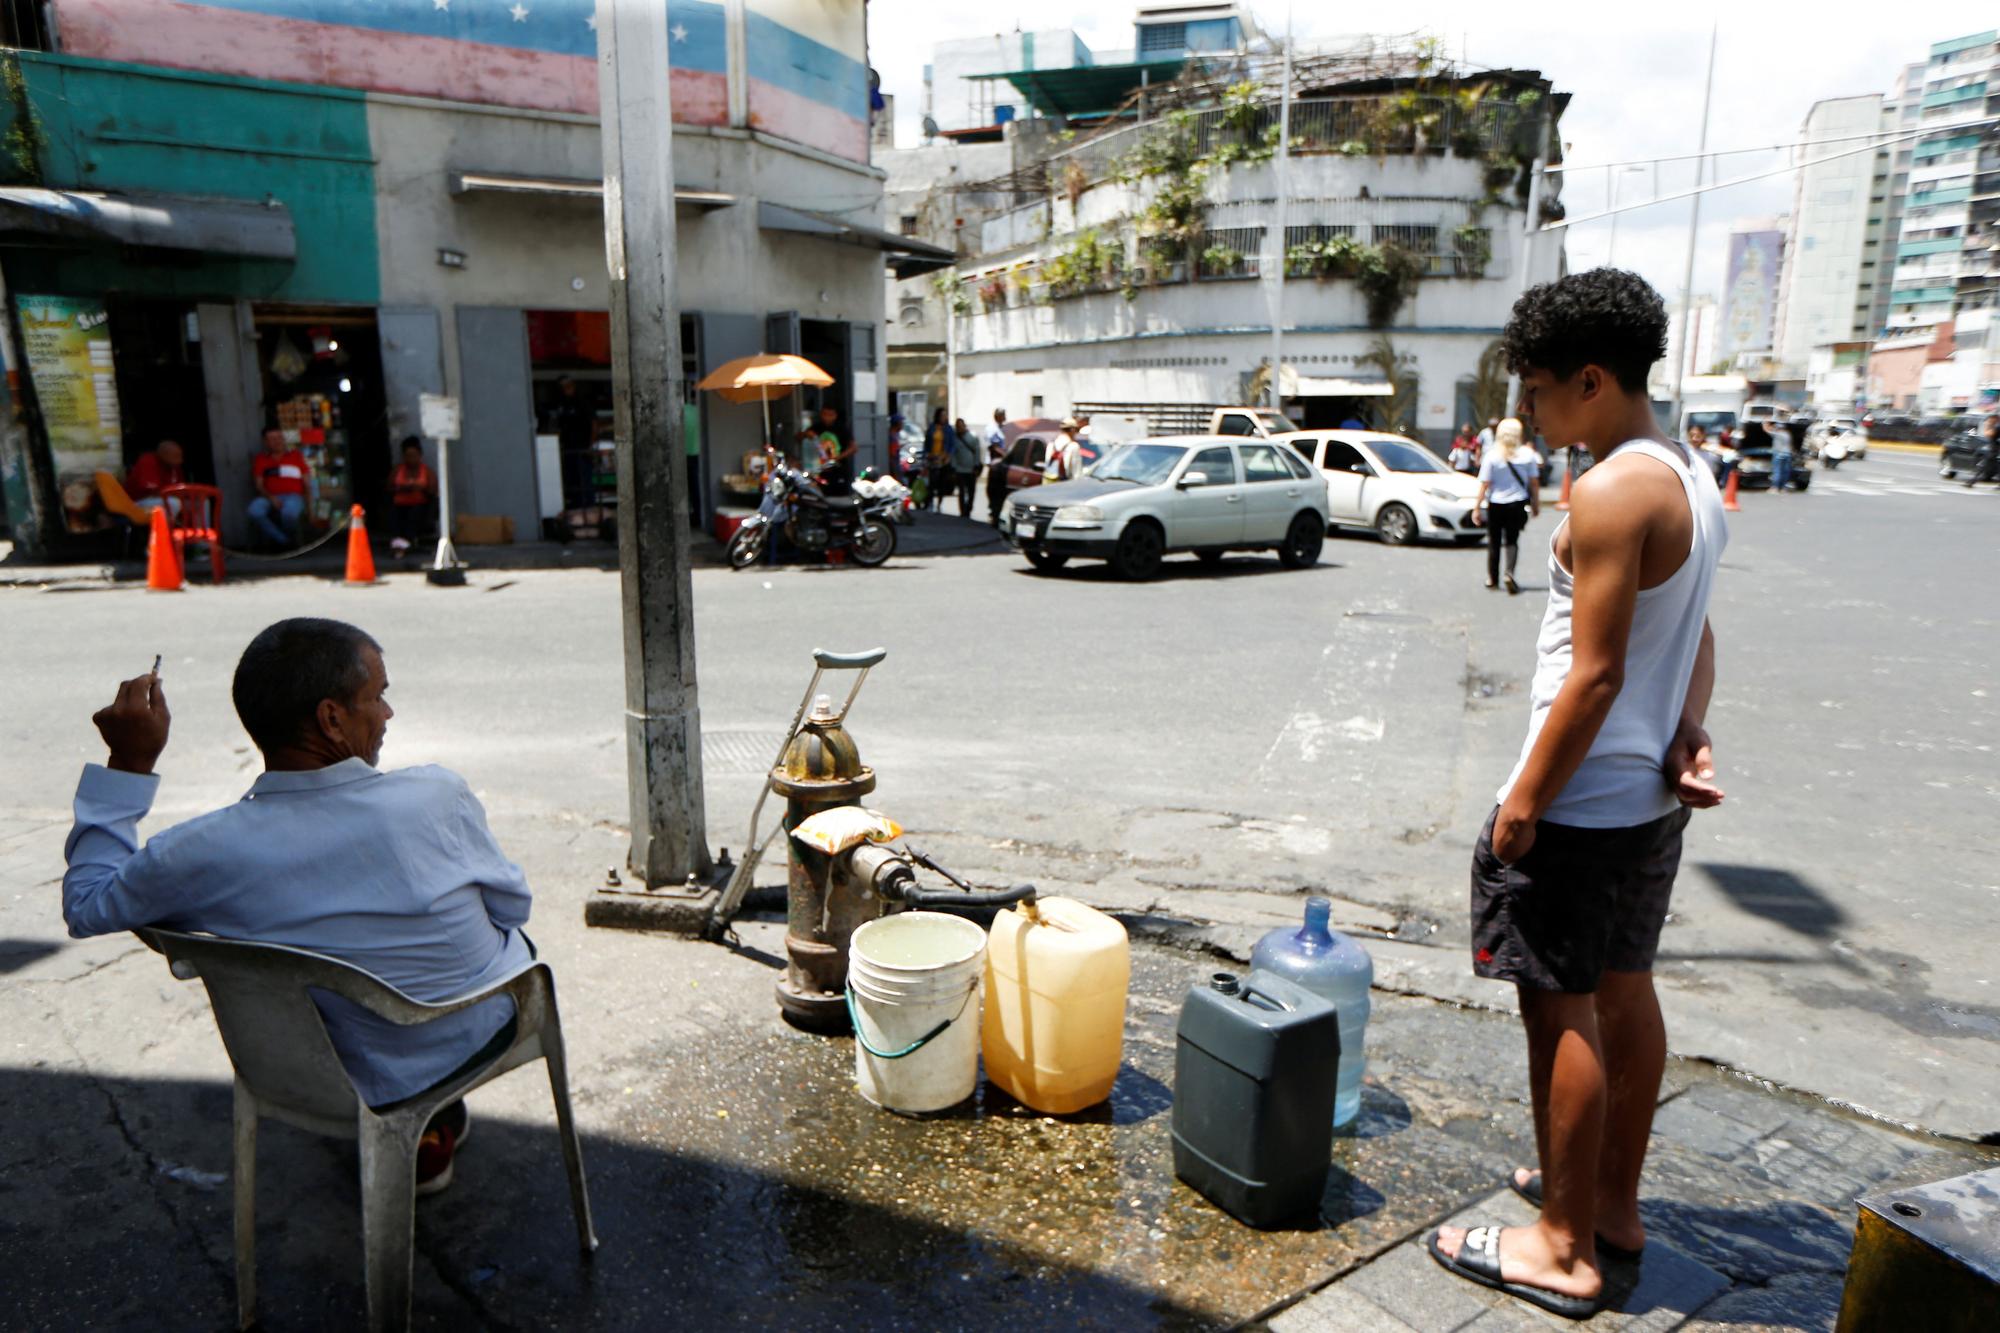 People get water from a fire hydrant, in Caracas